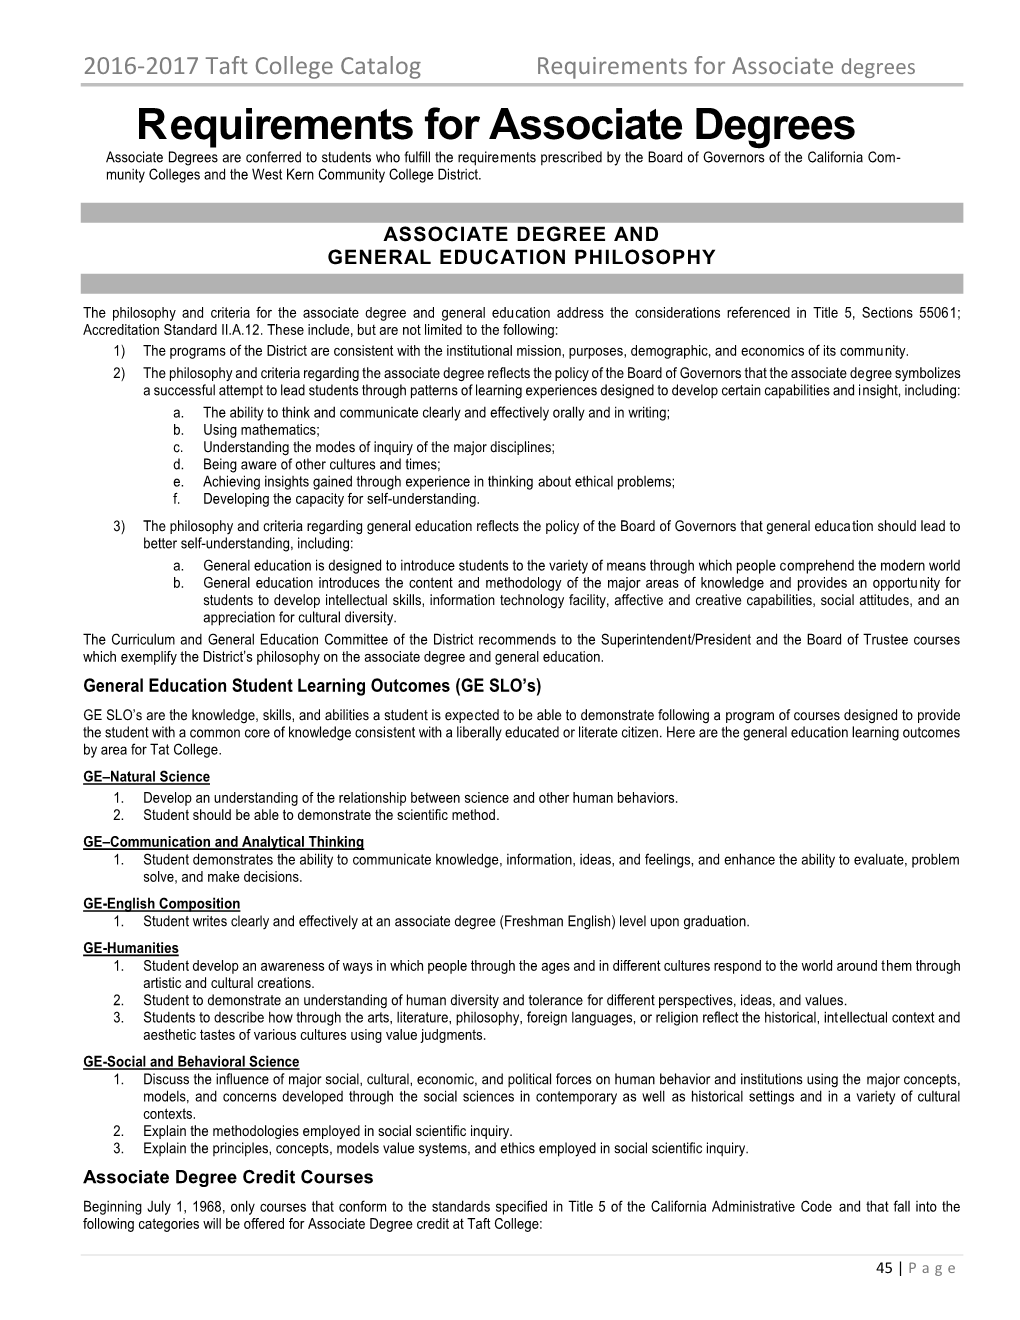 Requirements for Associate Degrees 2.Pdf